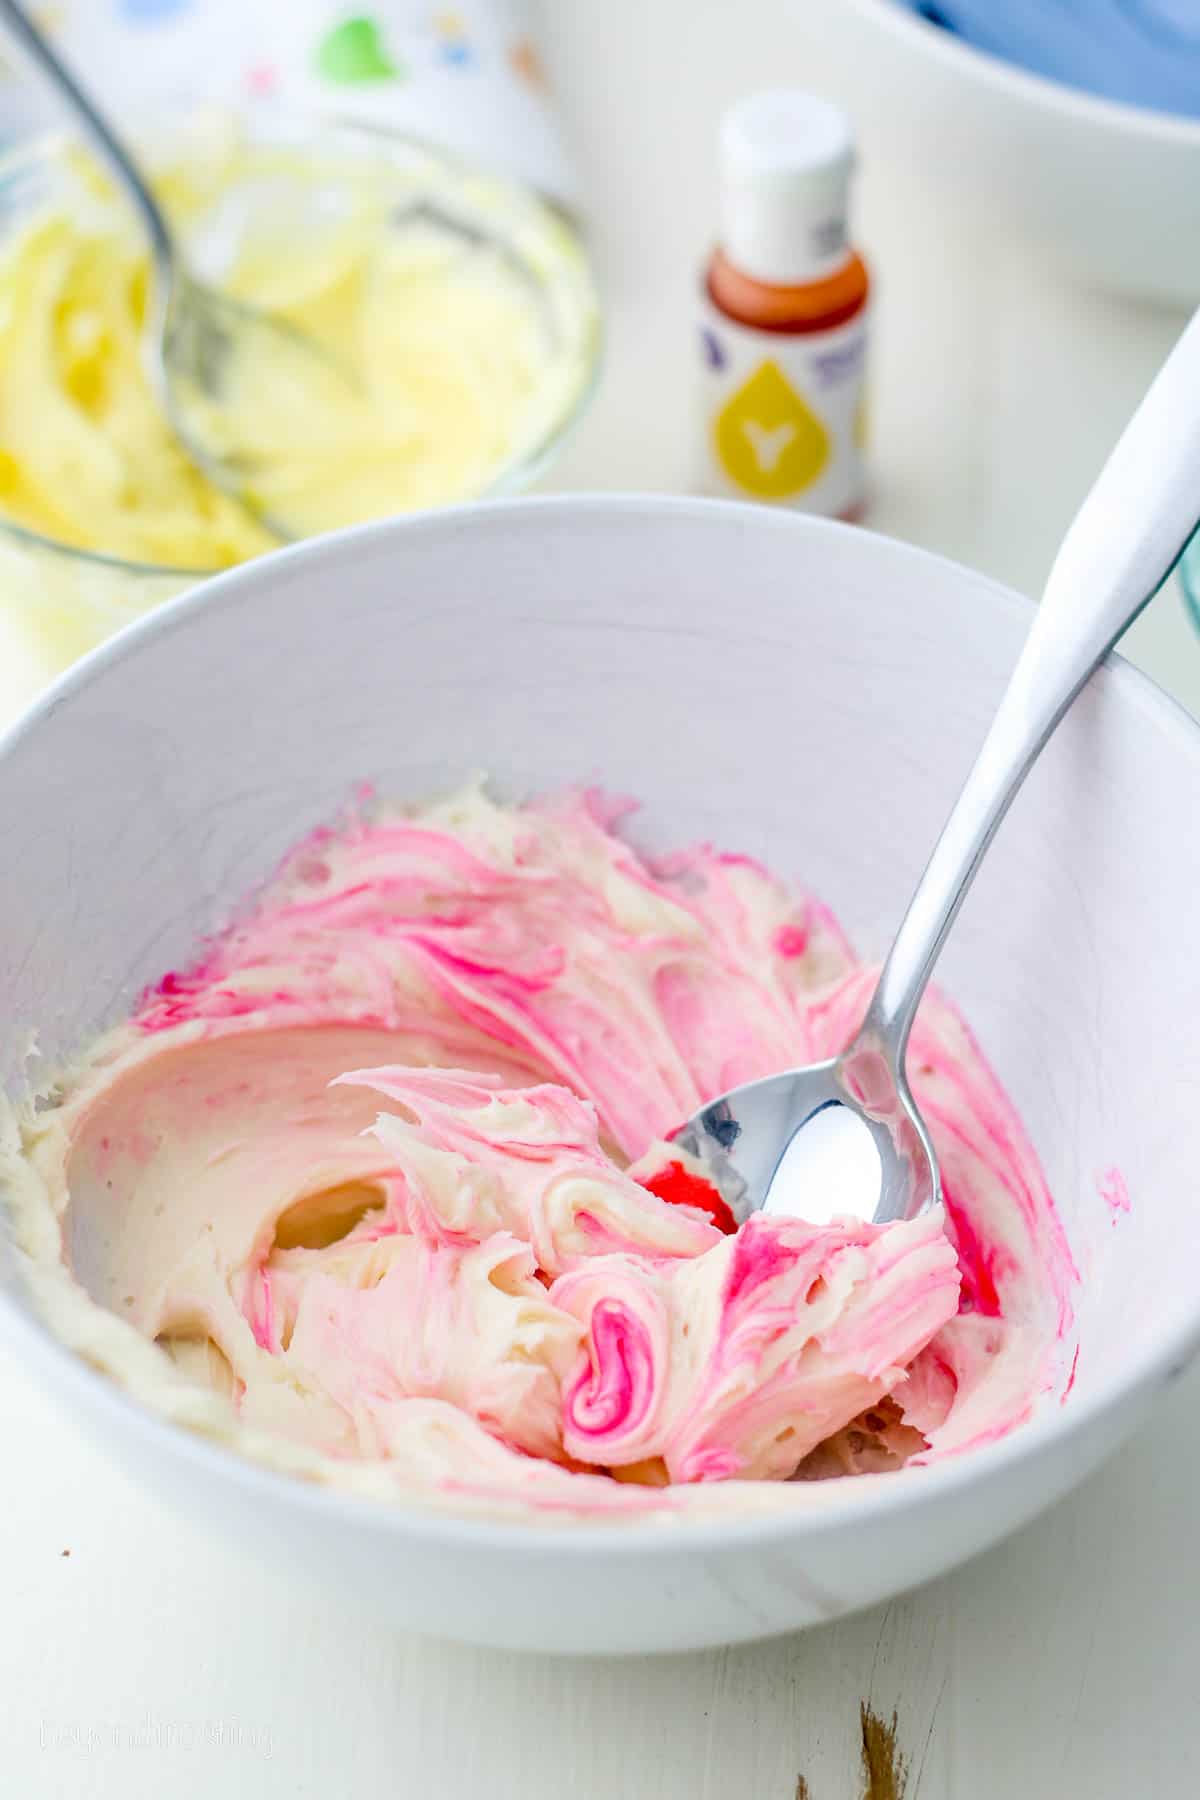 A spoon stirs pink food dye into a bowl of white buttercream frosting.